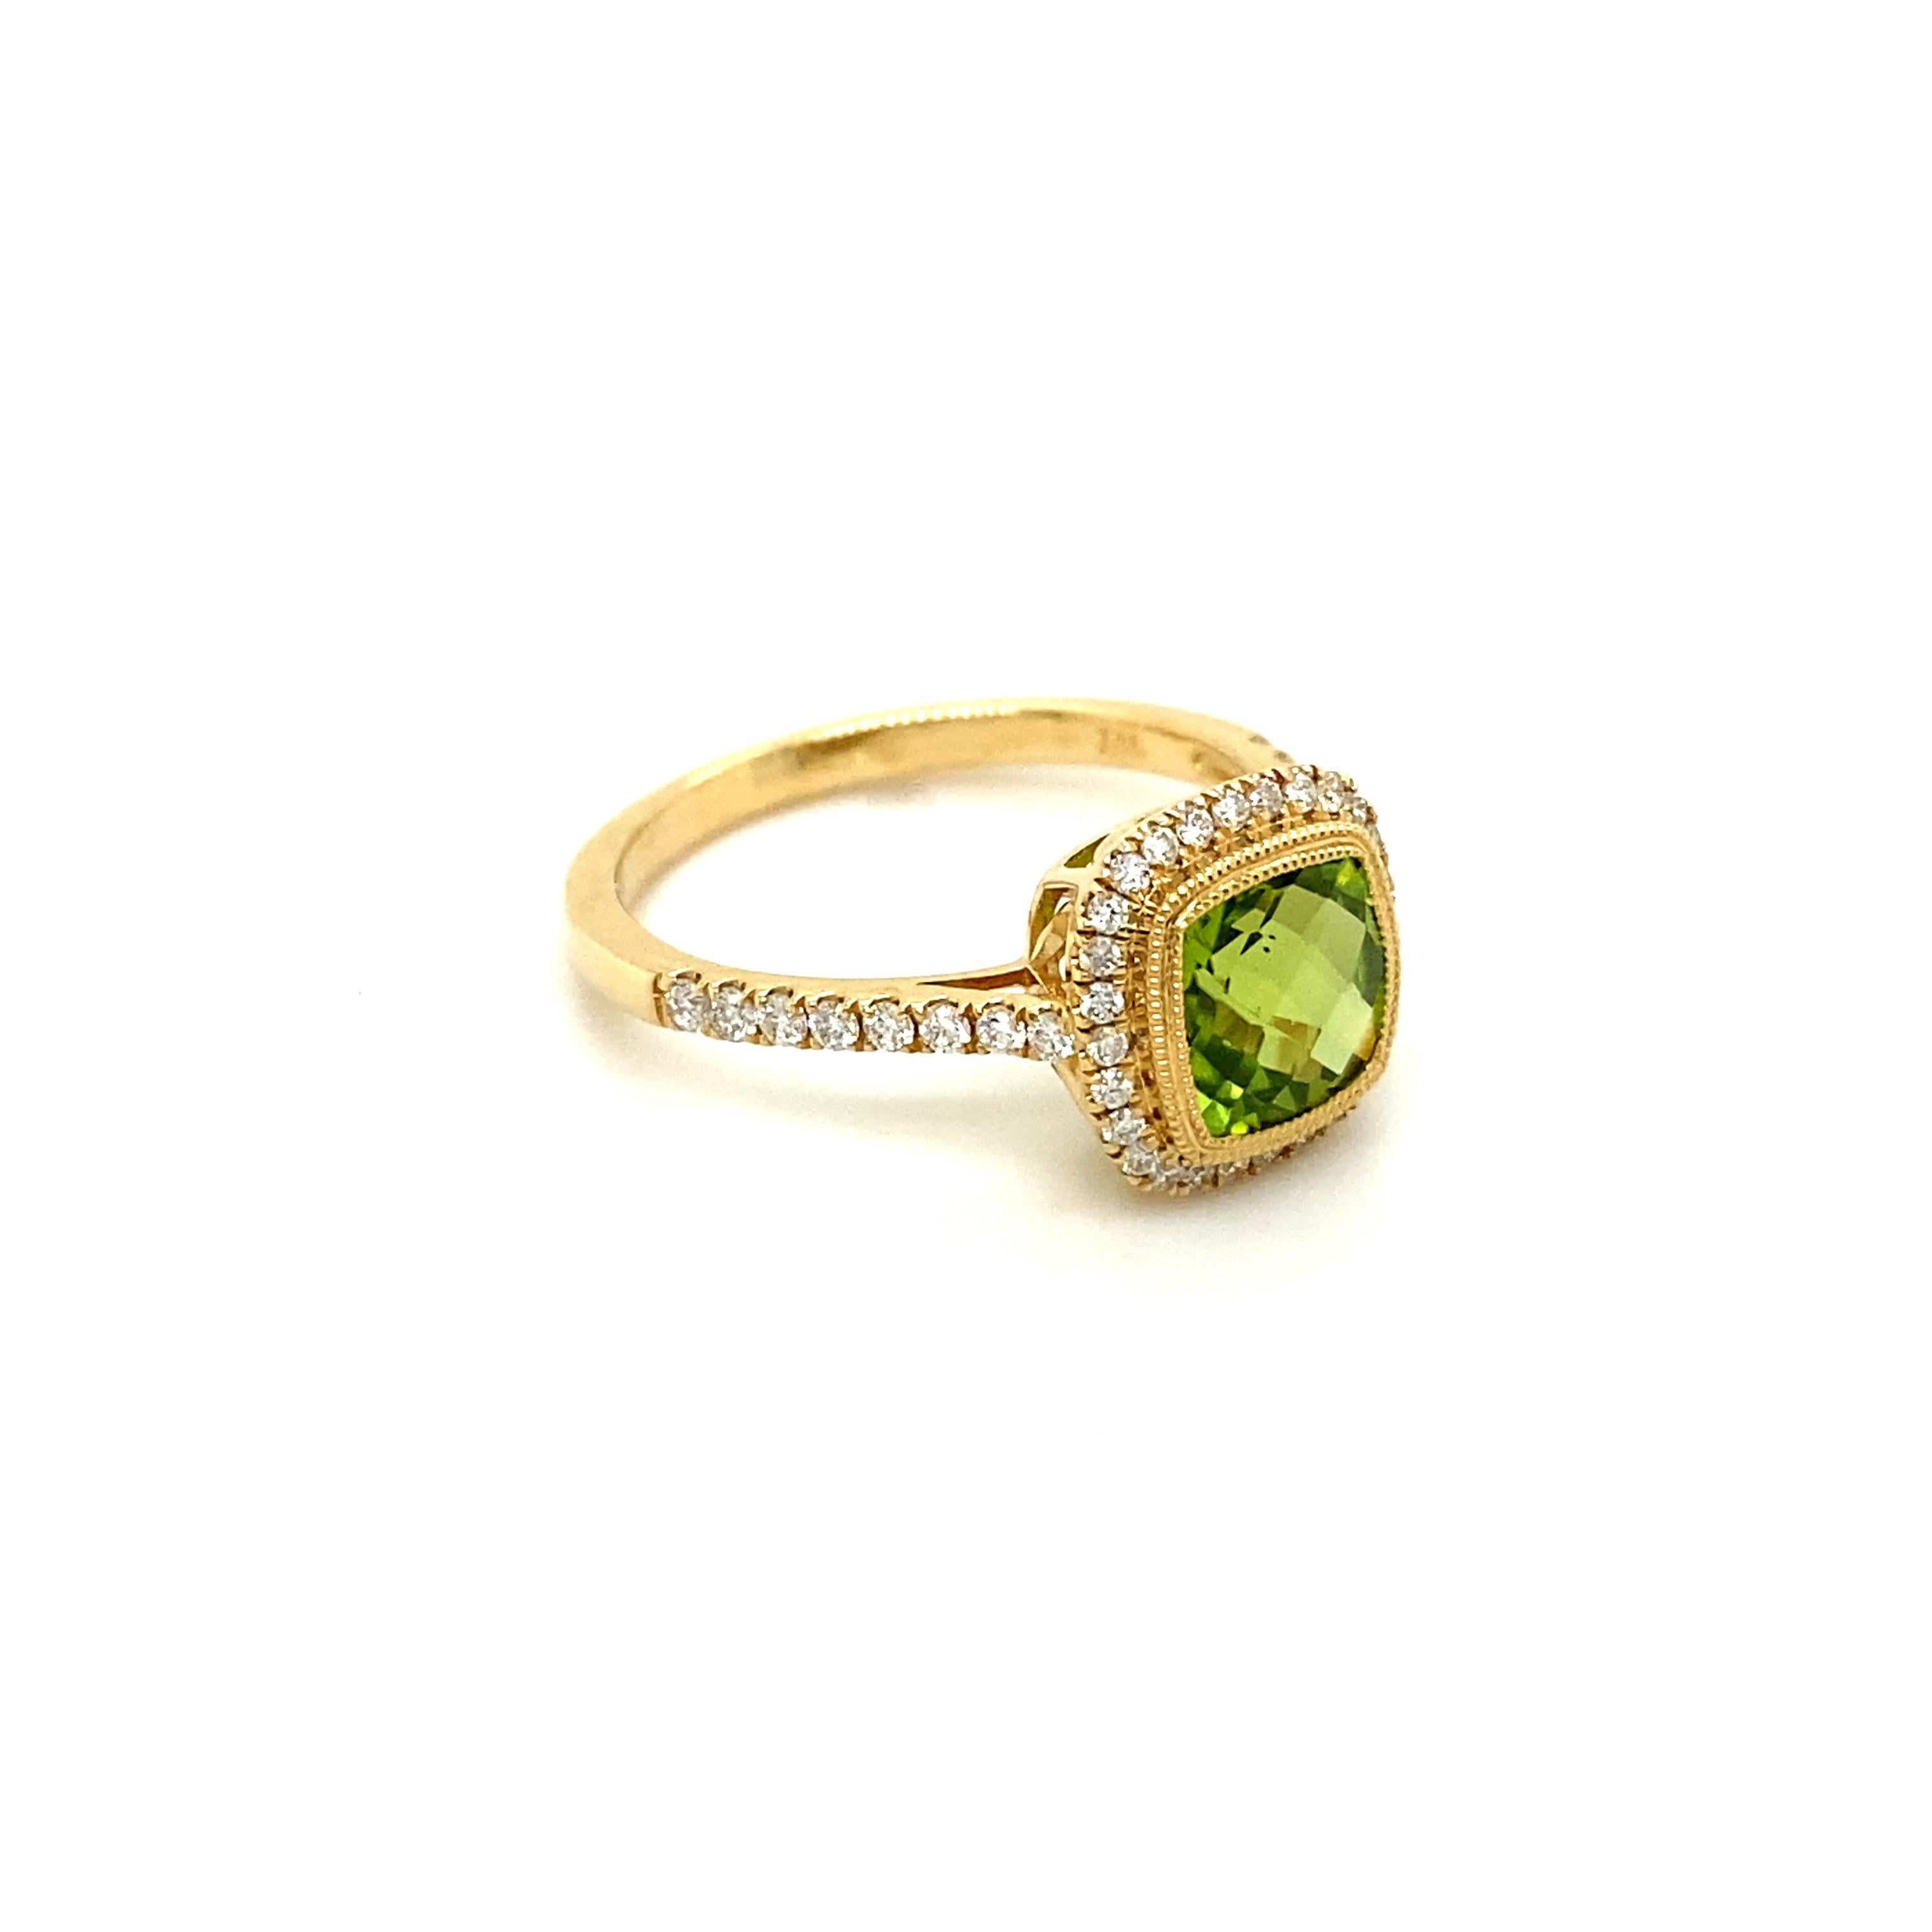 This beautiful and unique peridot ring will look lovely on anyone’s finger! The 1.60 carat peridot is checkerboard cut into a lovely cushion shape that sparkles from every direction! The diamonds around and going down the band accent the peridot